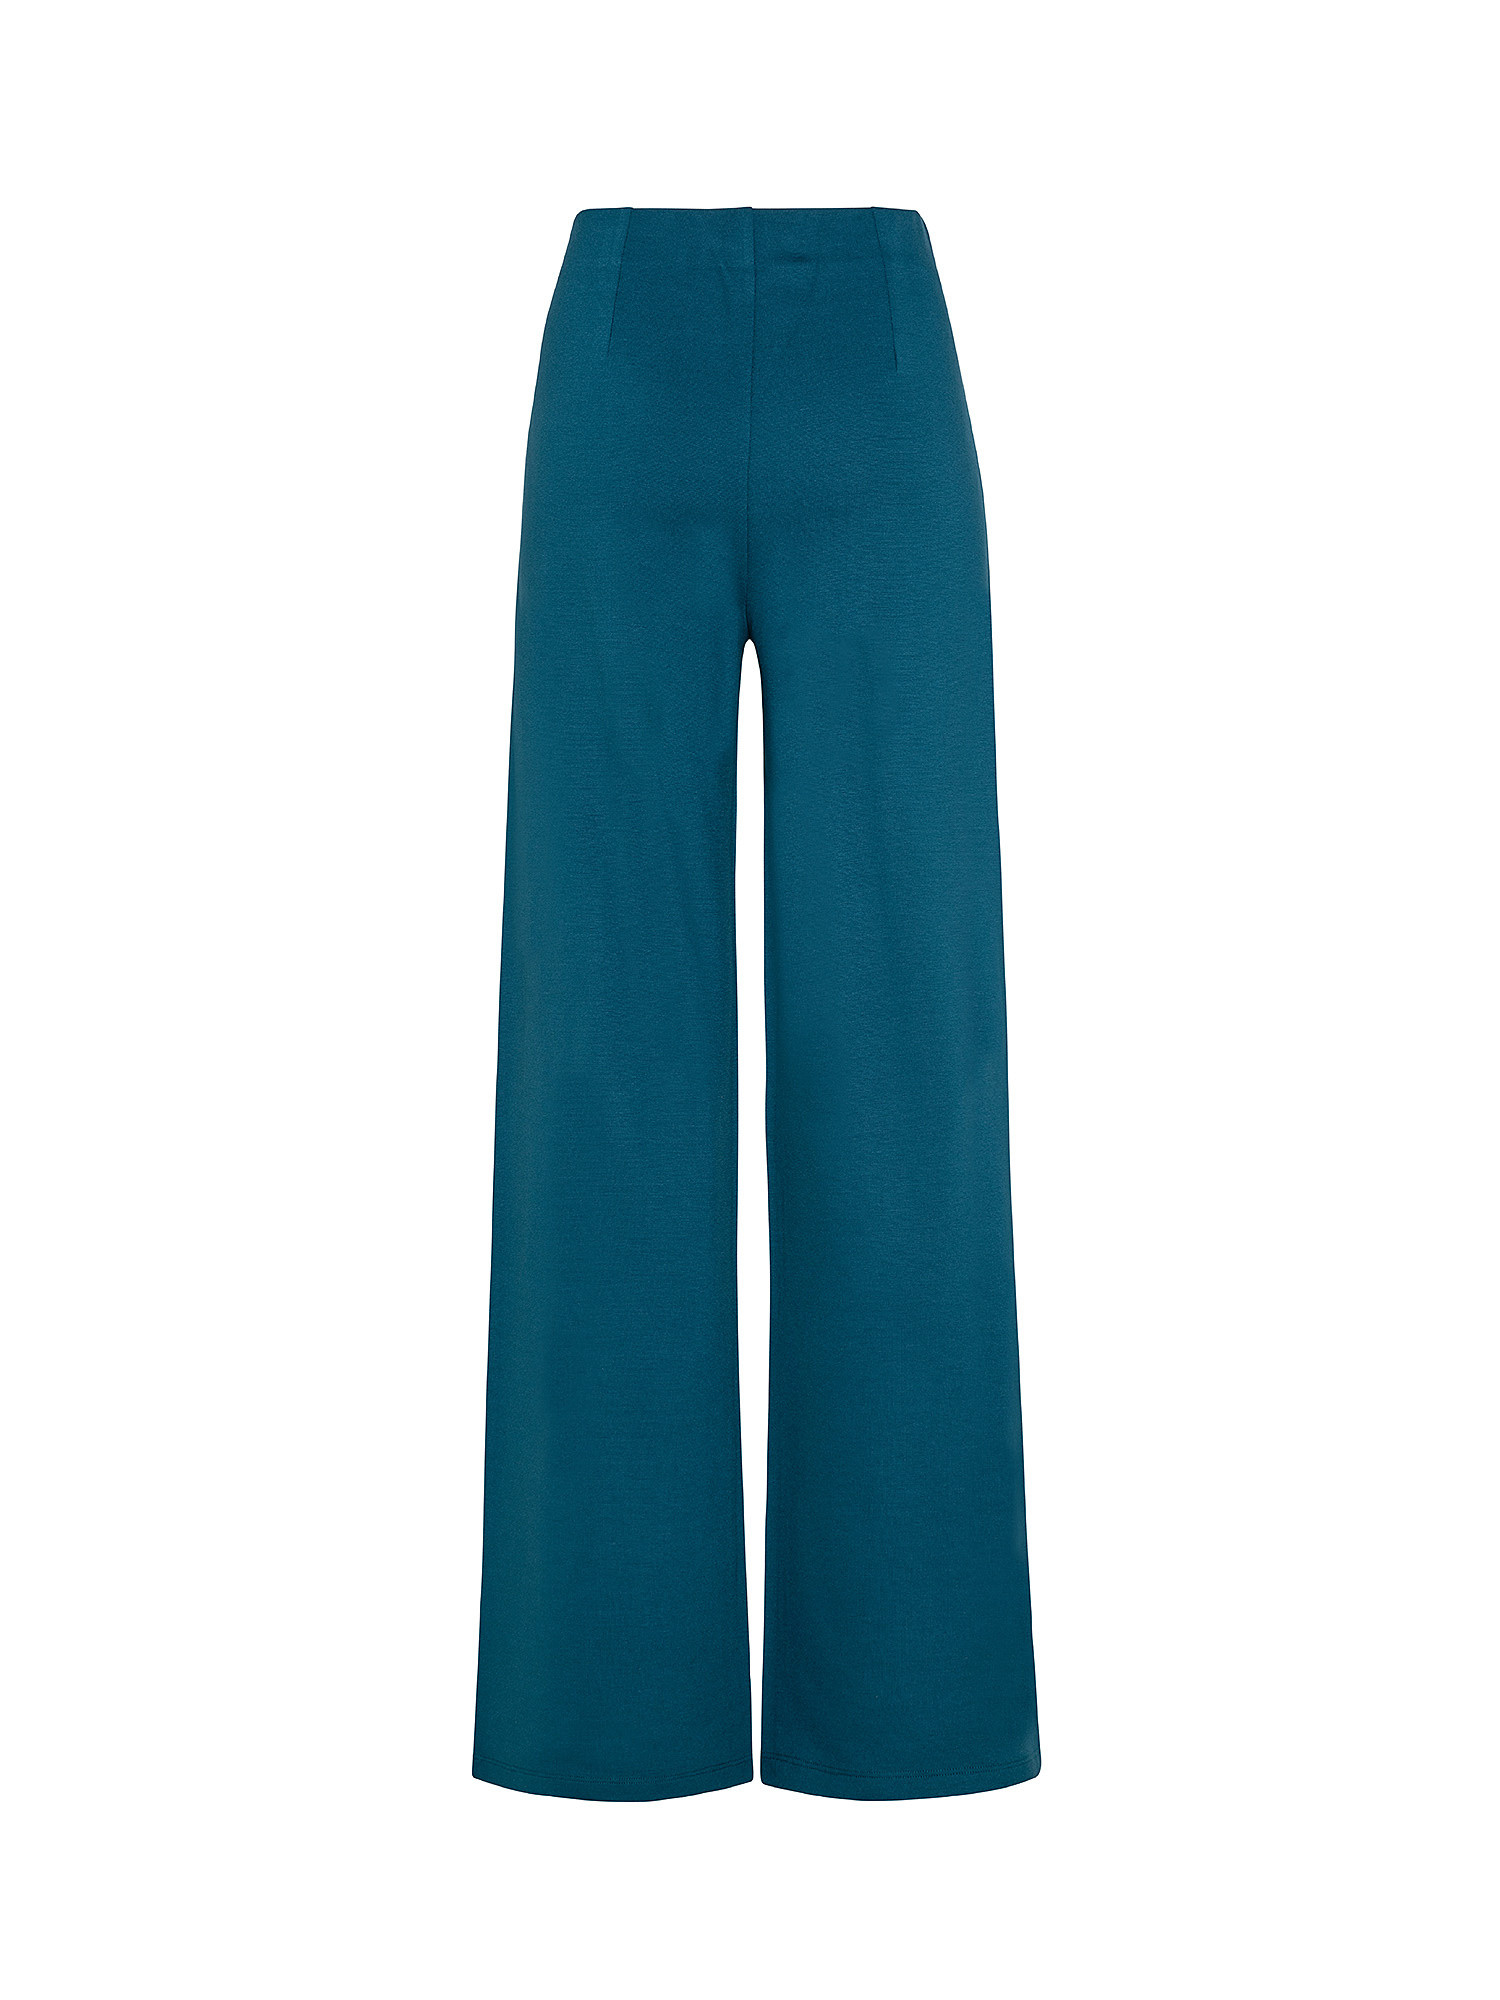 Wide leg trousers, Green teal, large image number 1